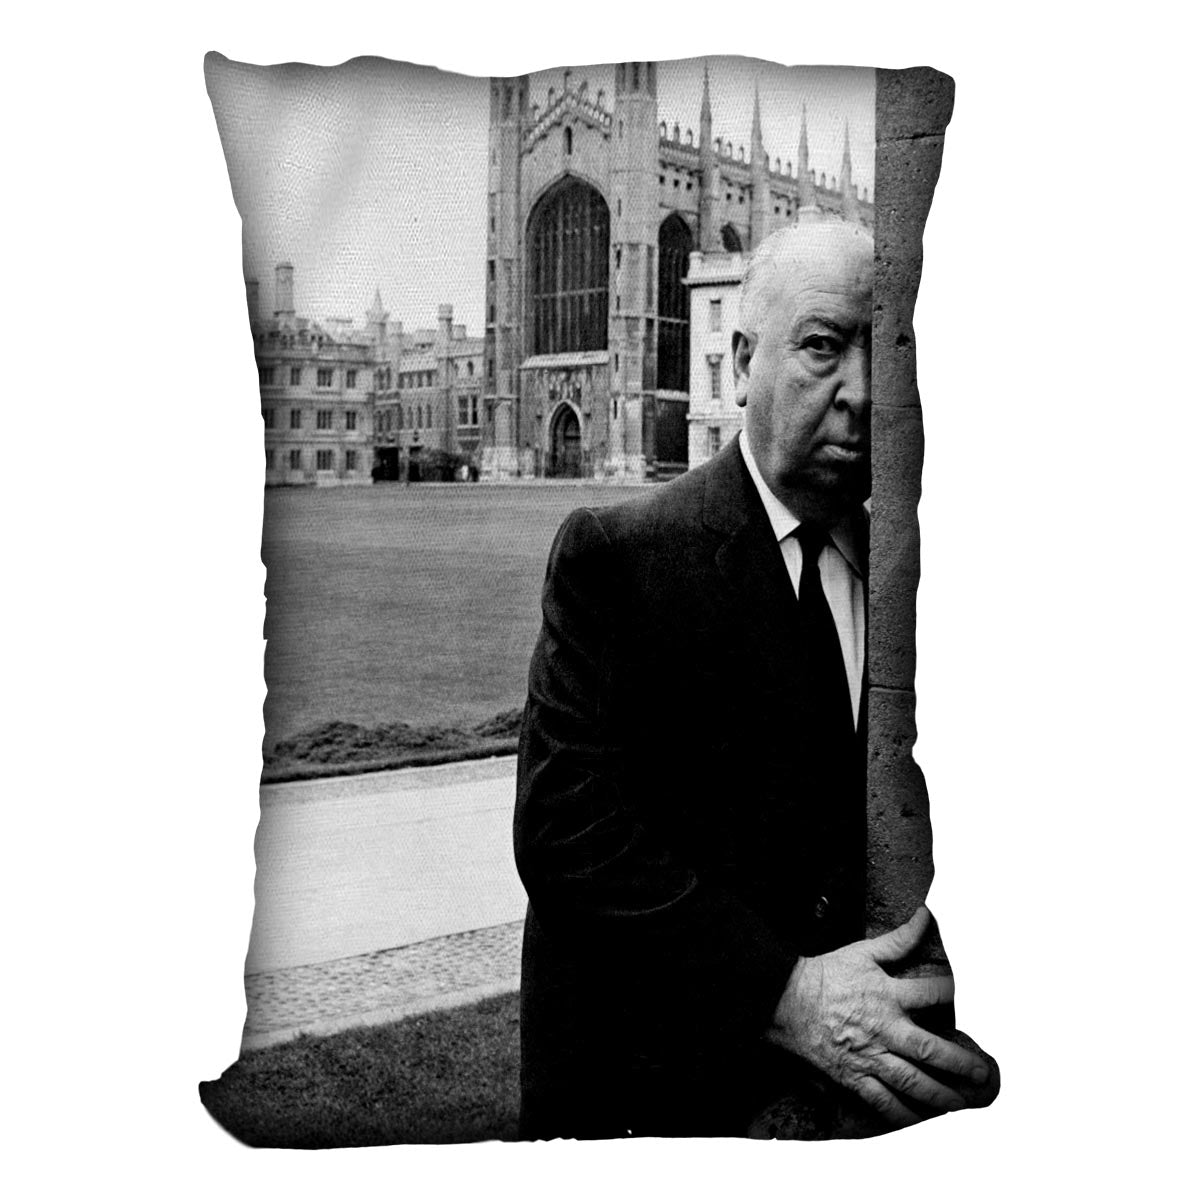 Alfred Hitchcock in 1969 Cushion